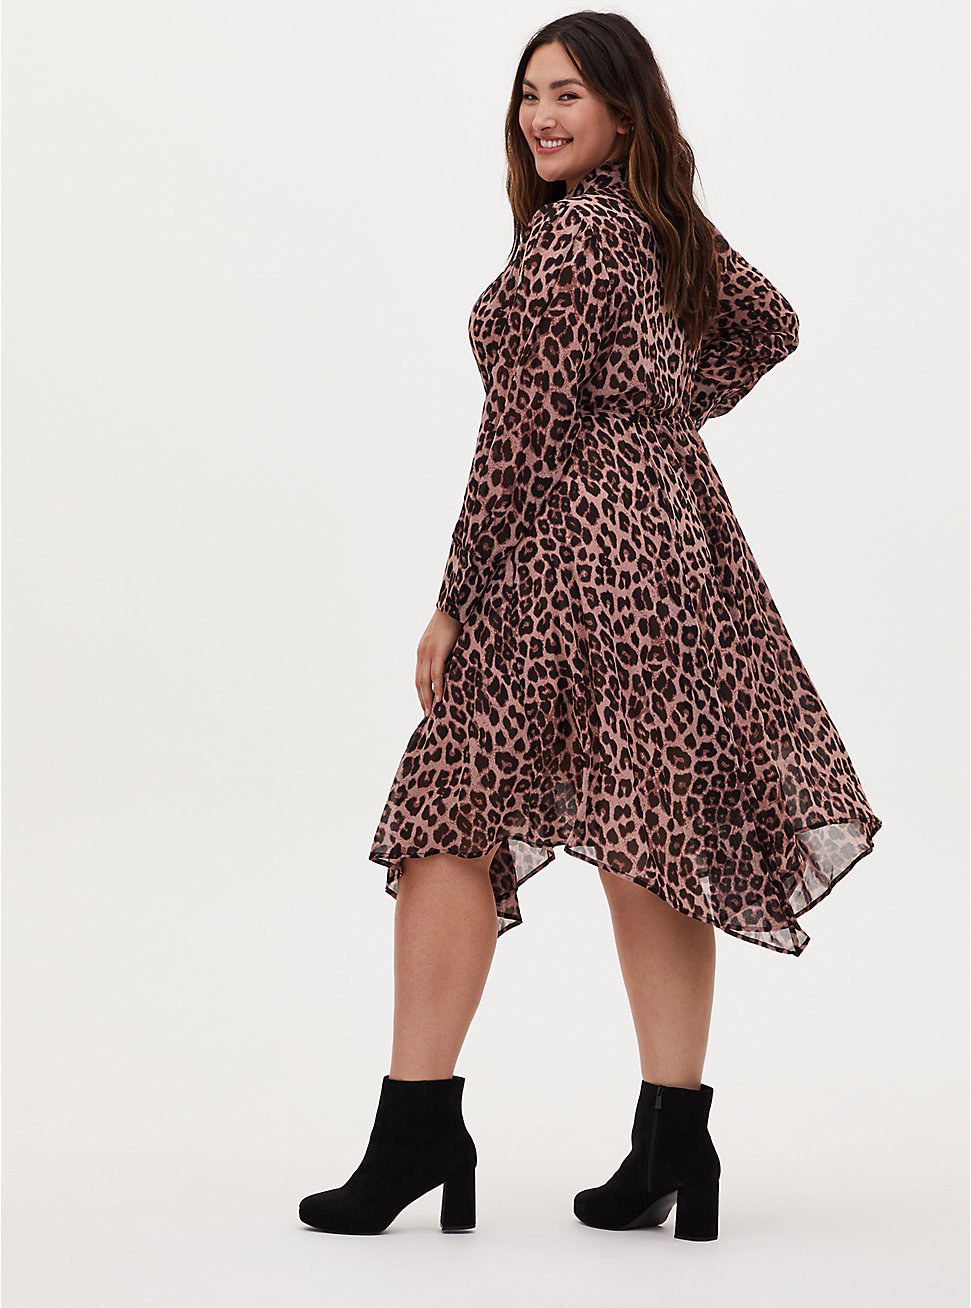 37 Gorgeous Winter Dresses You'll Basically Never Want To Take Off